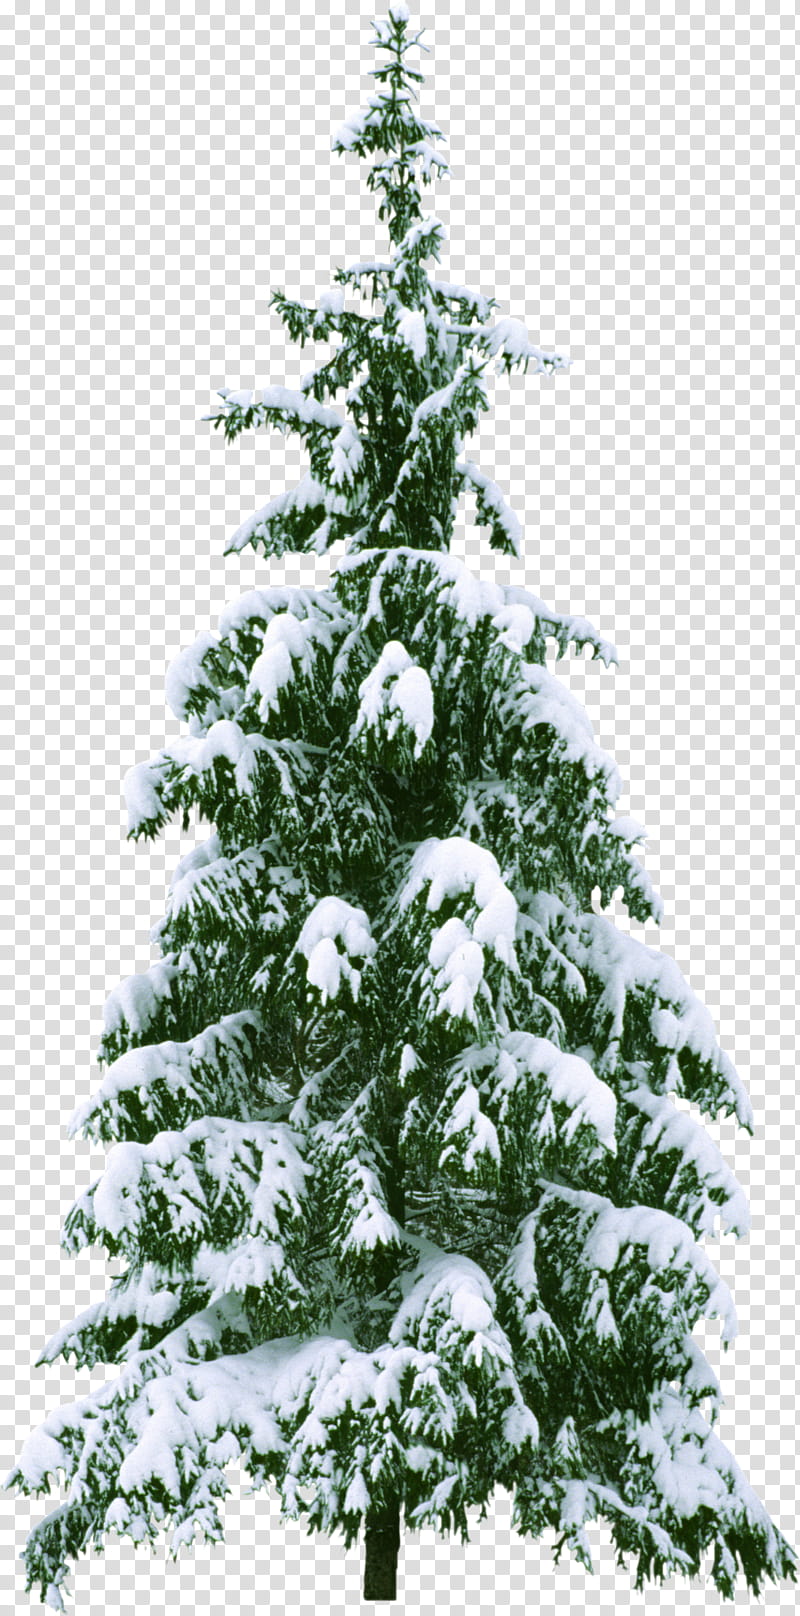 Christmas And New Year, Christmas Tree, Christmas Day, Snow, New Year Tree, Fraser Fir, Snowflake, Christmas Decoration transparent background PNG clipart